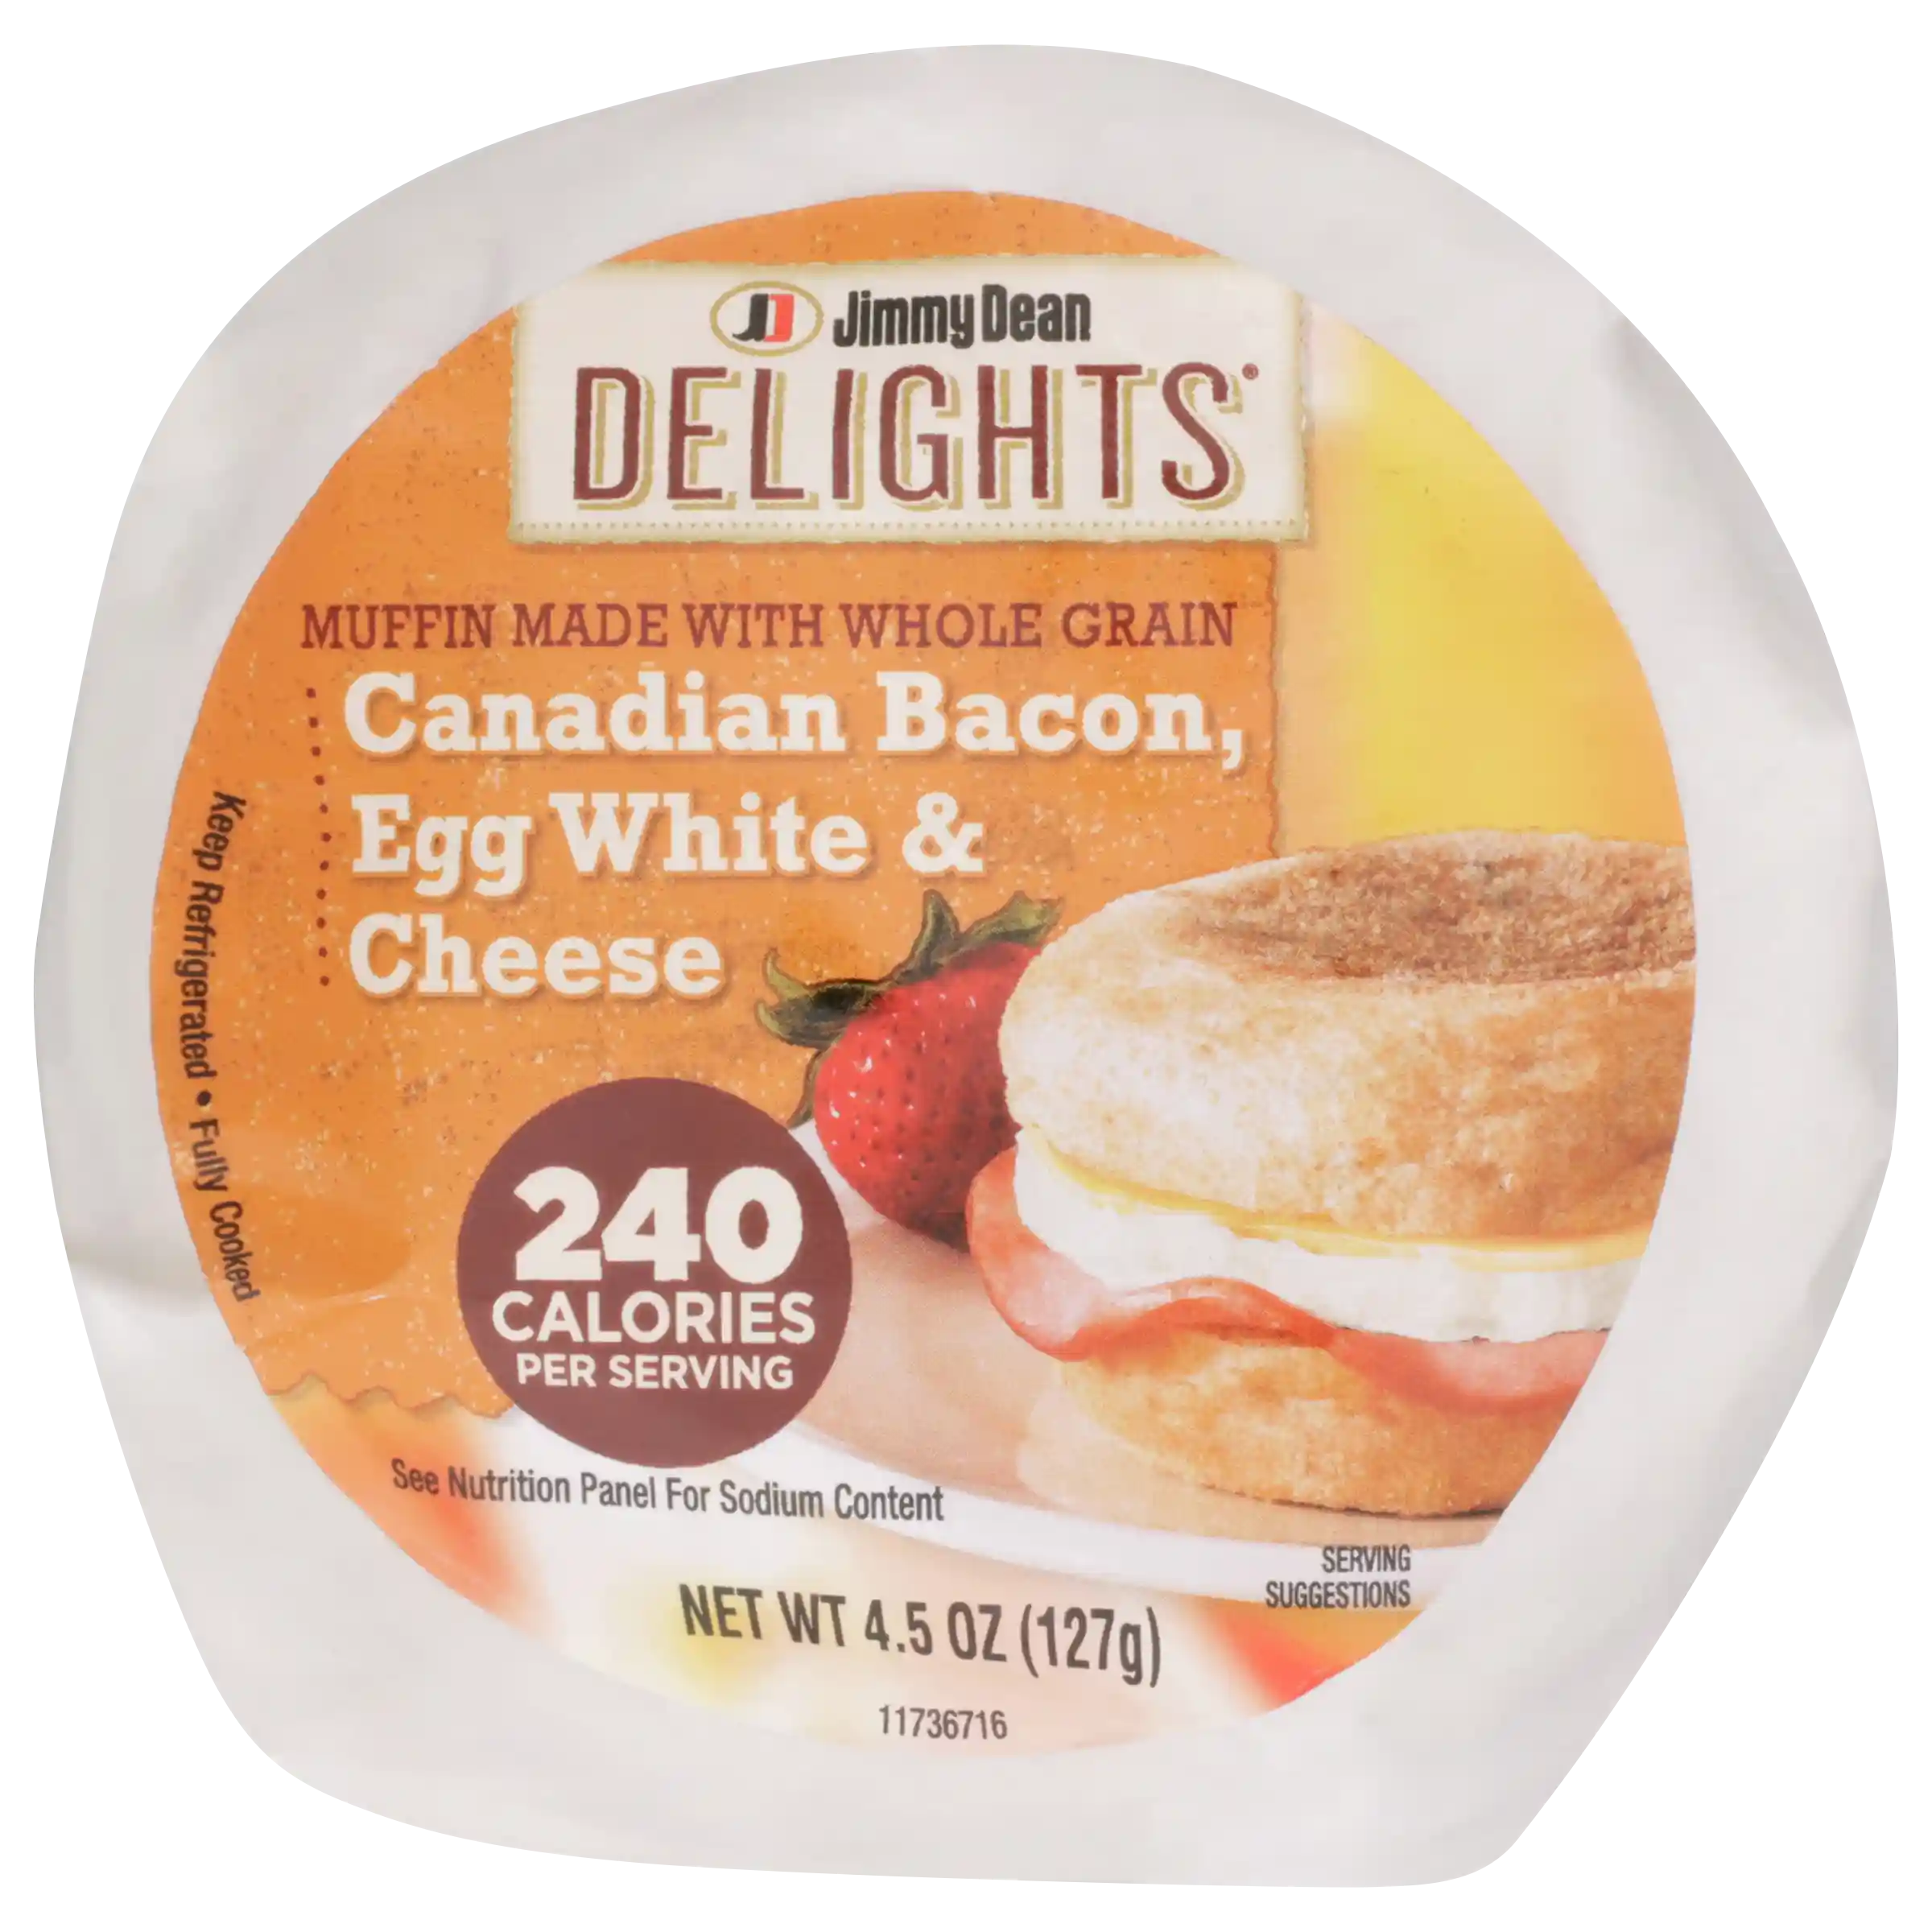 Jimmy Dean Delights® Butcher Wrapped Canadian Bacon, Egg White & Cheese Whole Grain Muffin_image_11